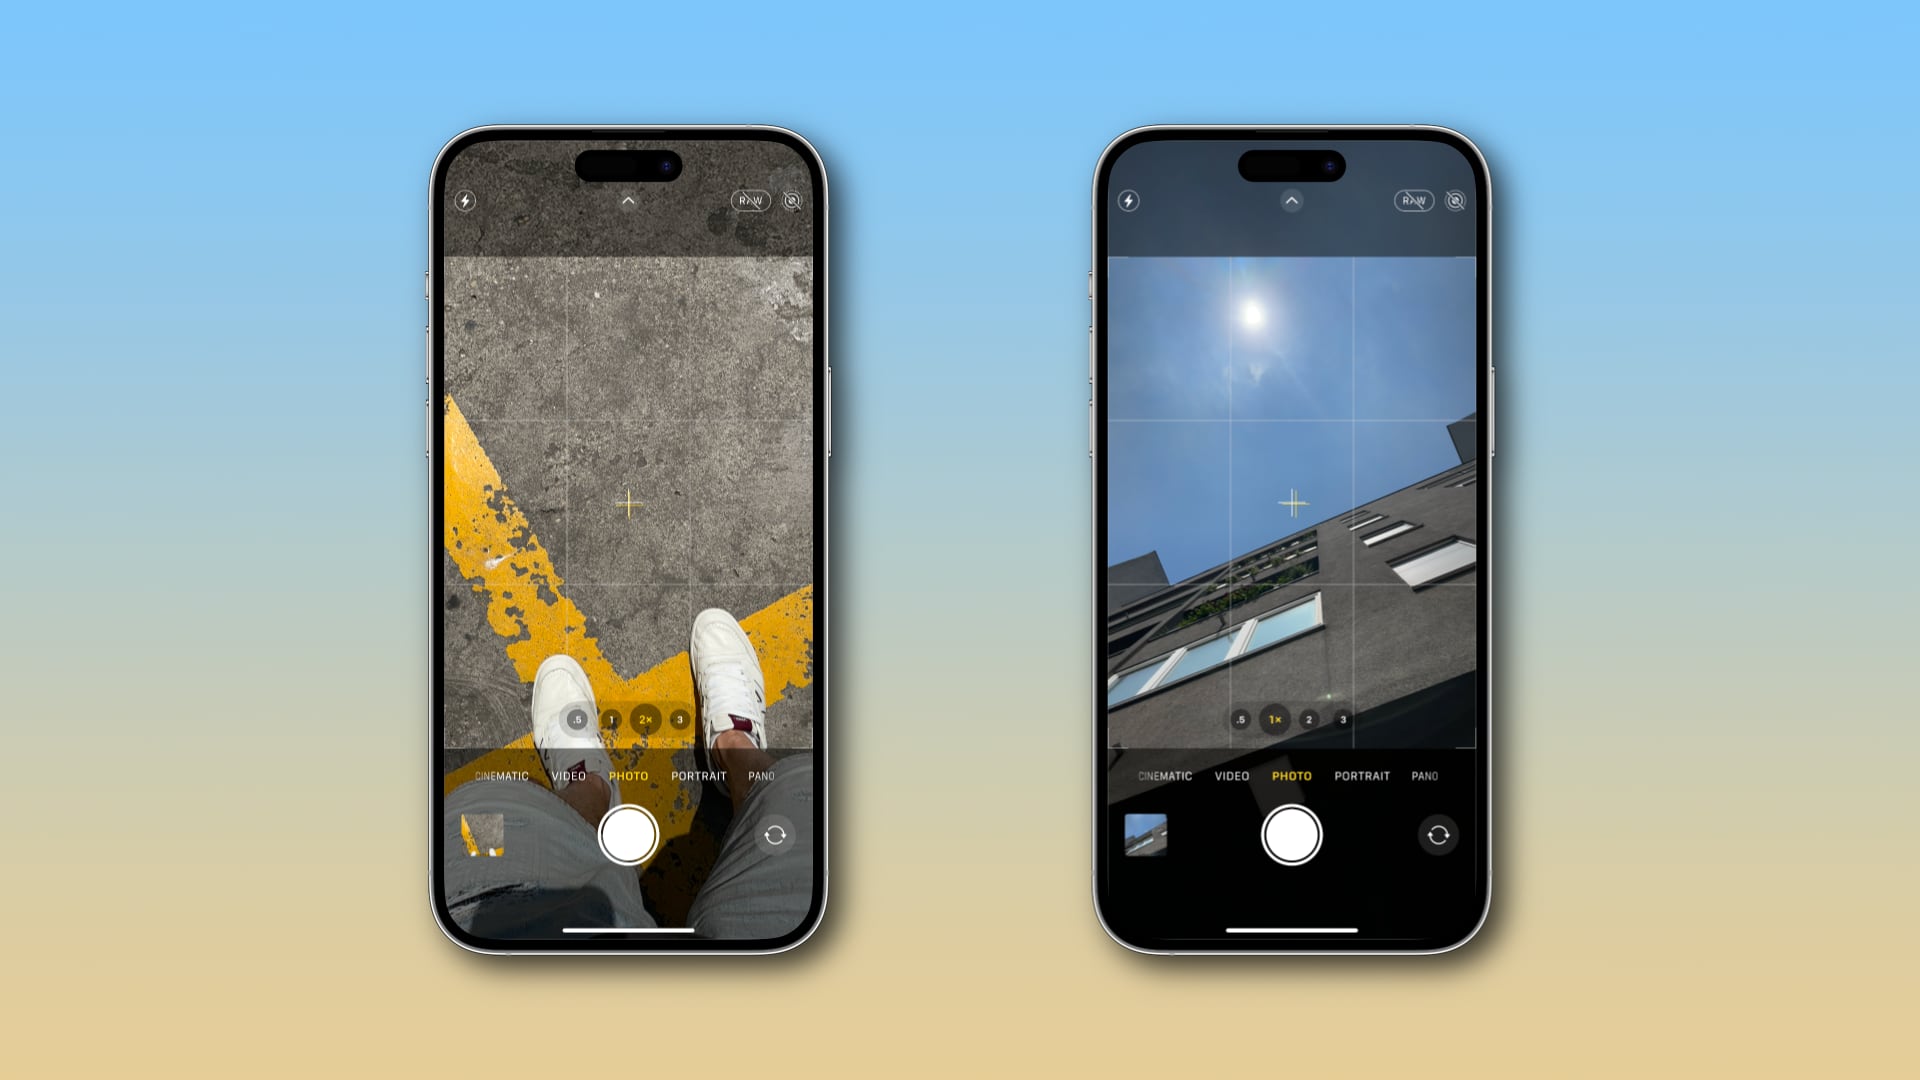 Examples of the iPhone camera level when shooting overhead and top-down scenes